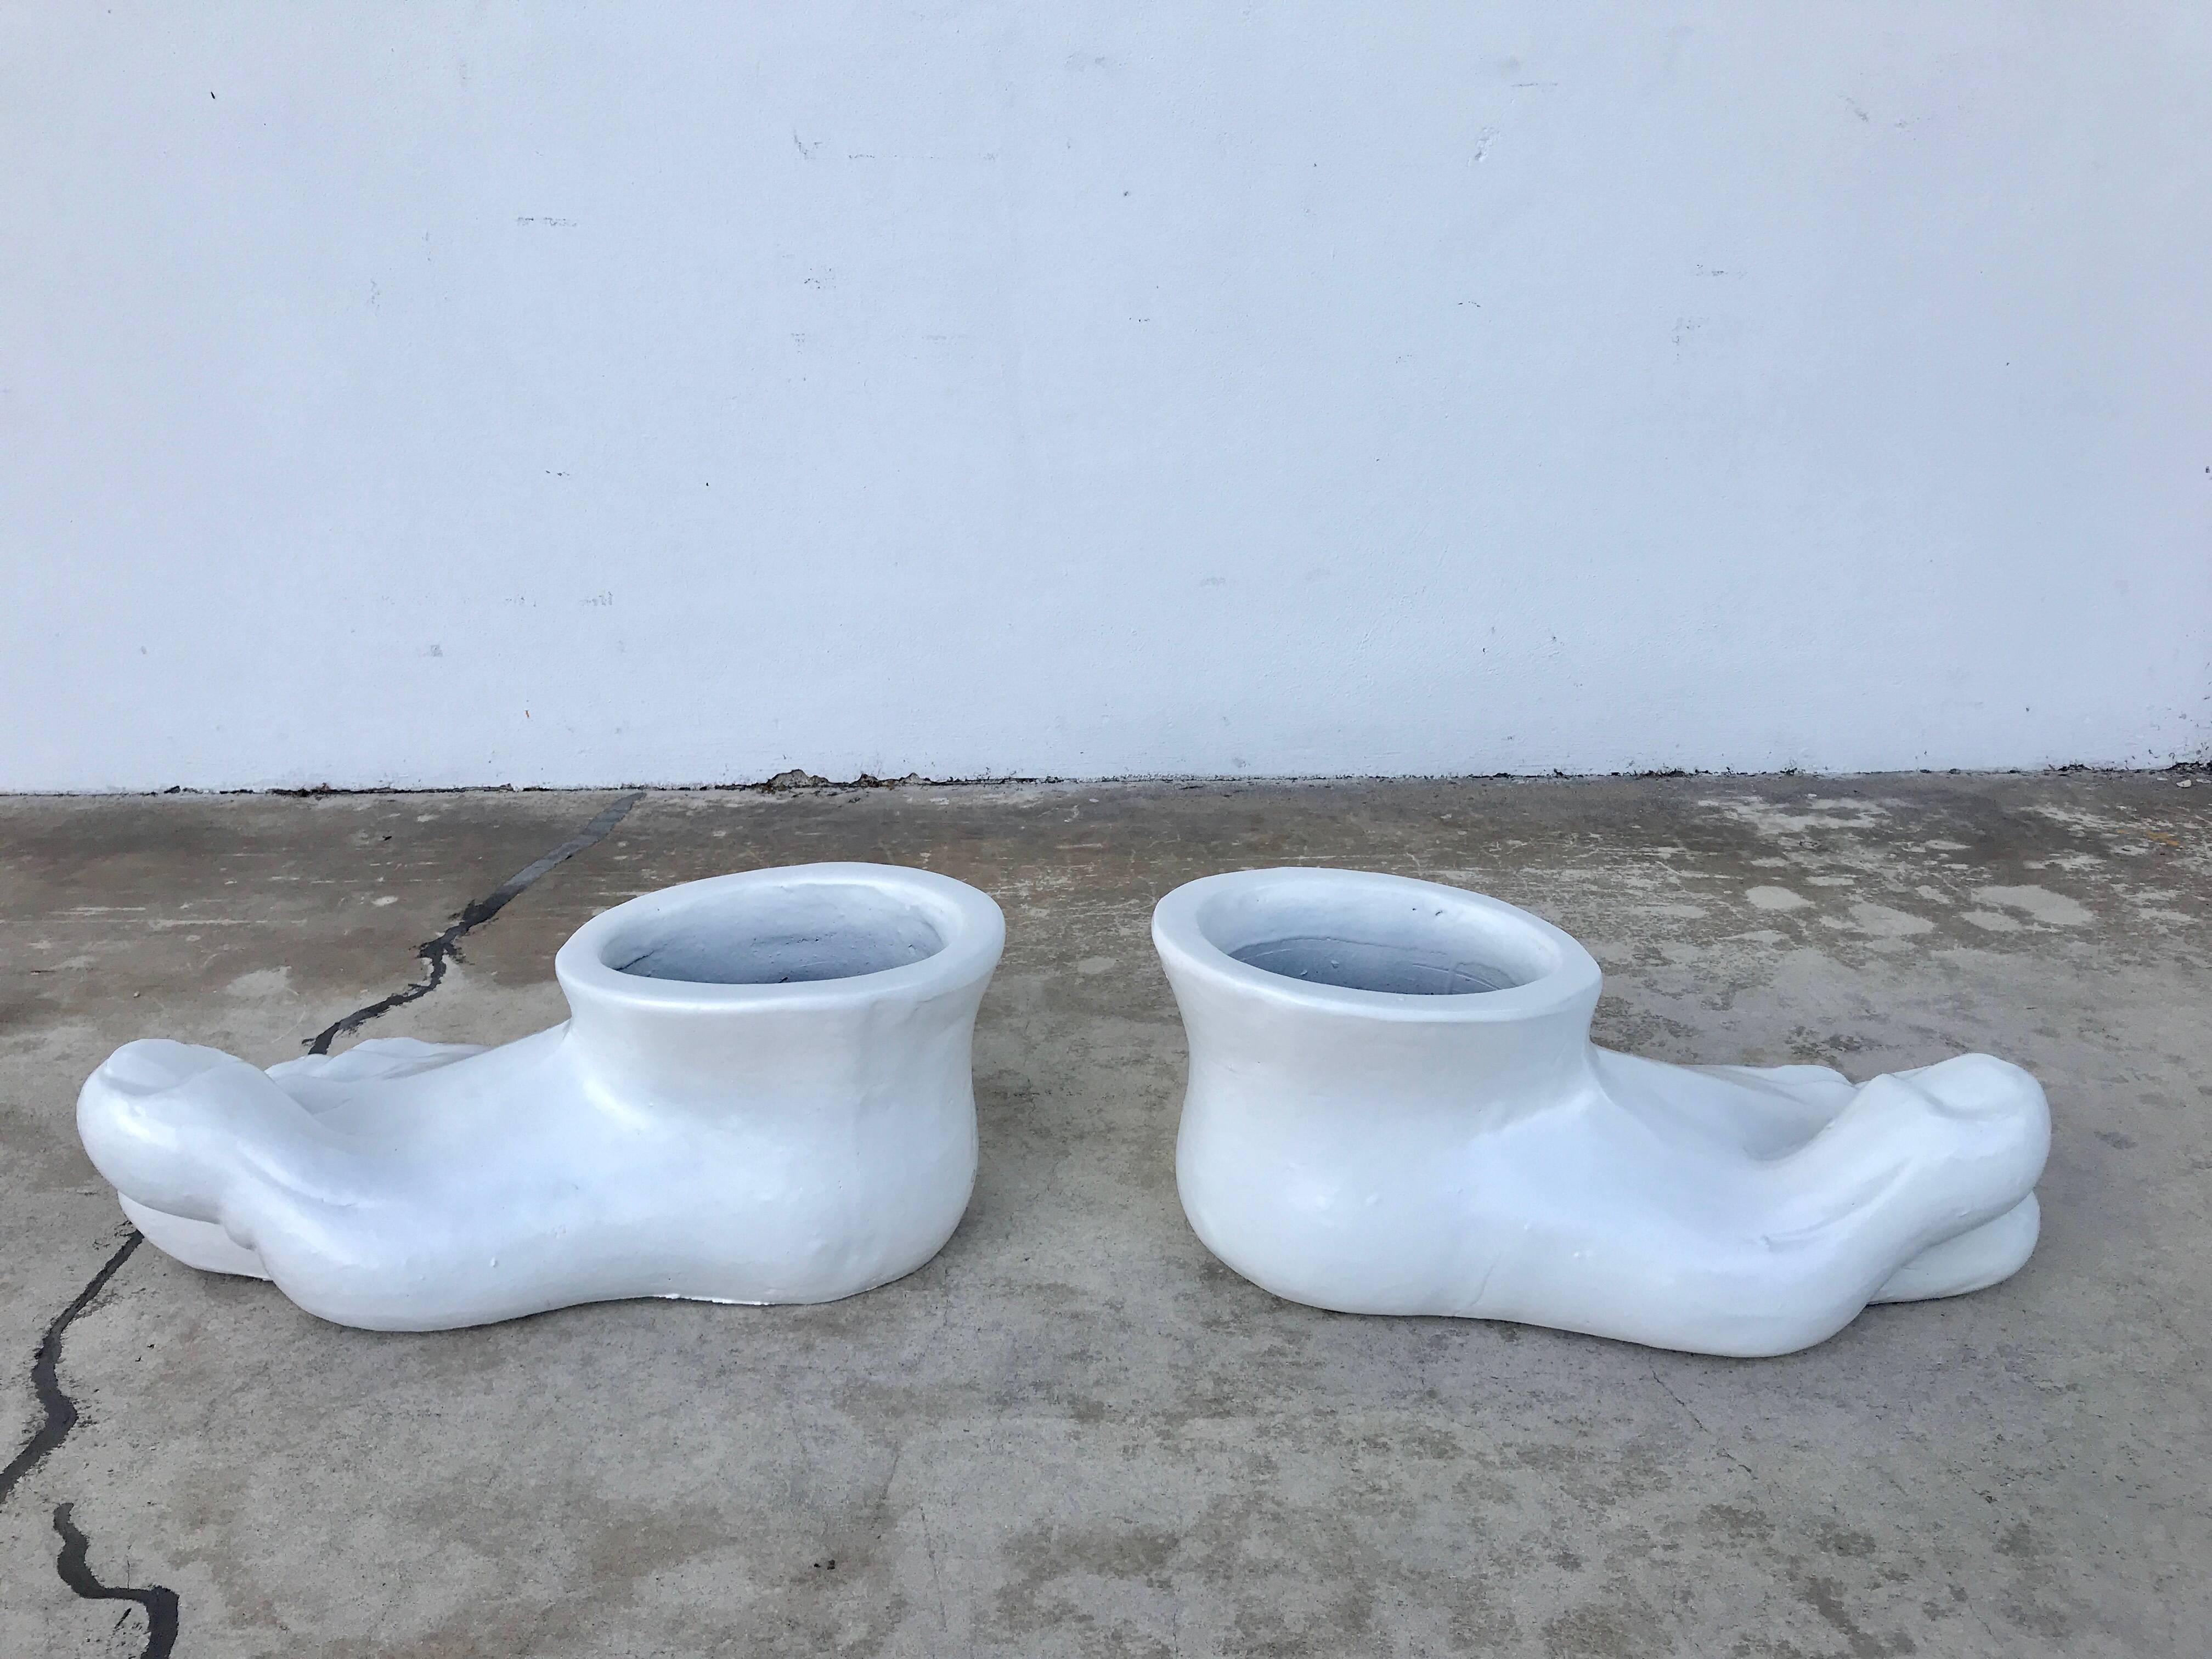 Pair of Grand Tour style roman foot planters, after the antique, second pair available
each one of substantial size of white glazed terracotta
opening is 8.5 